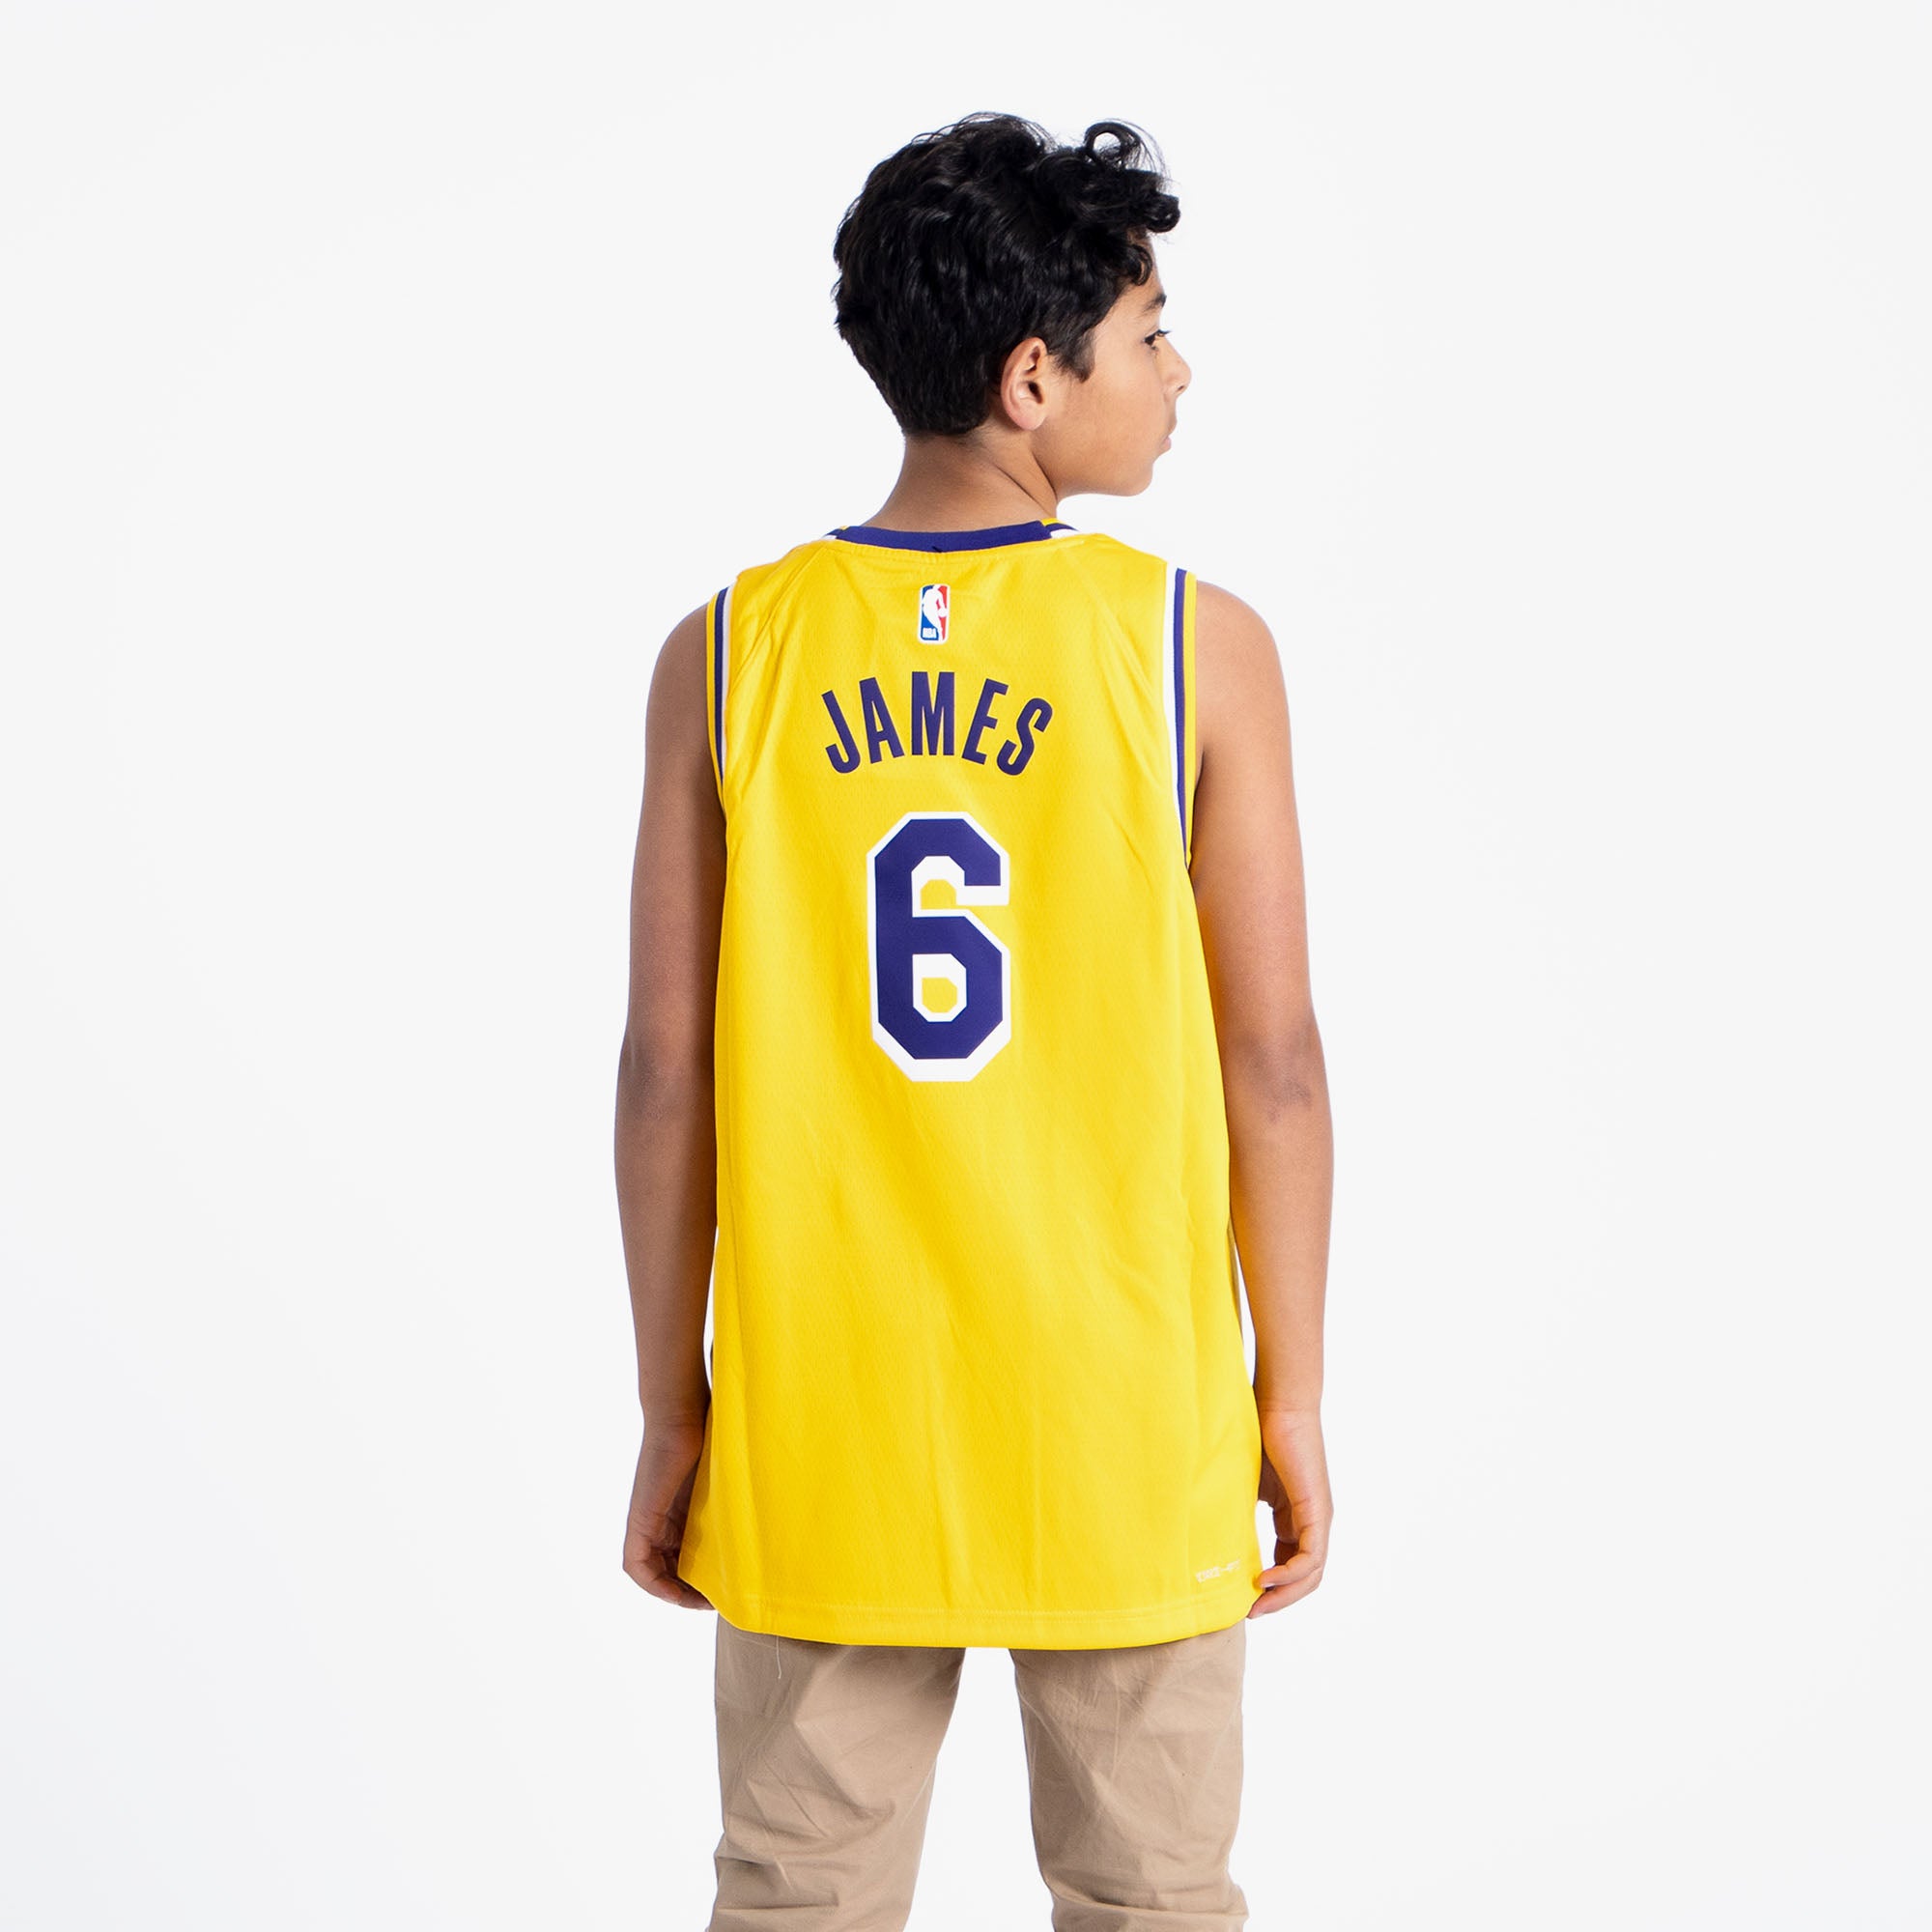 New 15 16 kids #23 LeBron James youth Jersey Team Yellow Red White blue  James Basketball Jersey 2015 Kids Rev 30 New Meterial - AliExpress